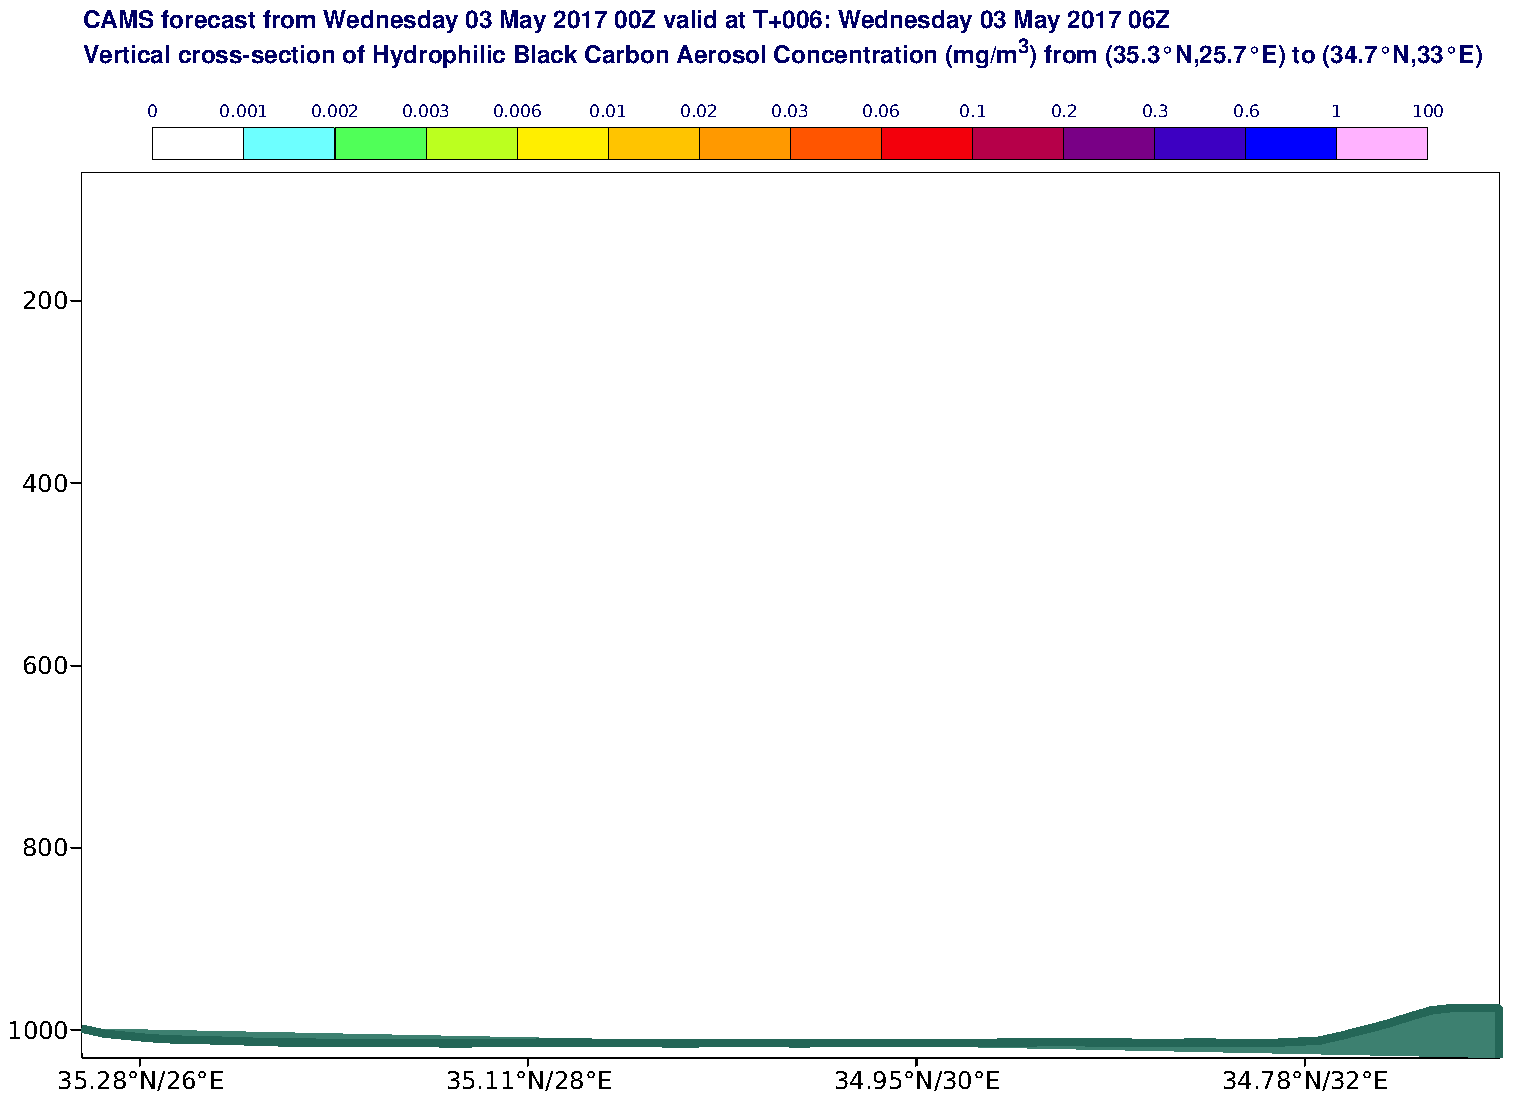 Vertical cross-section of Hydrophilic Black Carbon Aerosol Concentration (mg/m3) valid at T6 - 2017-05-03 06:00